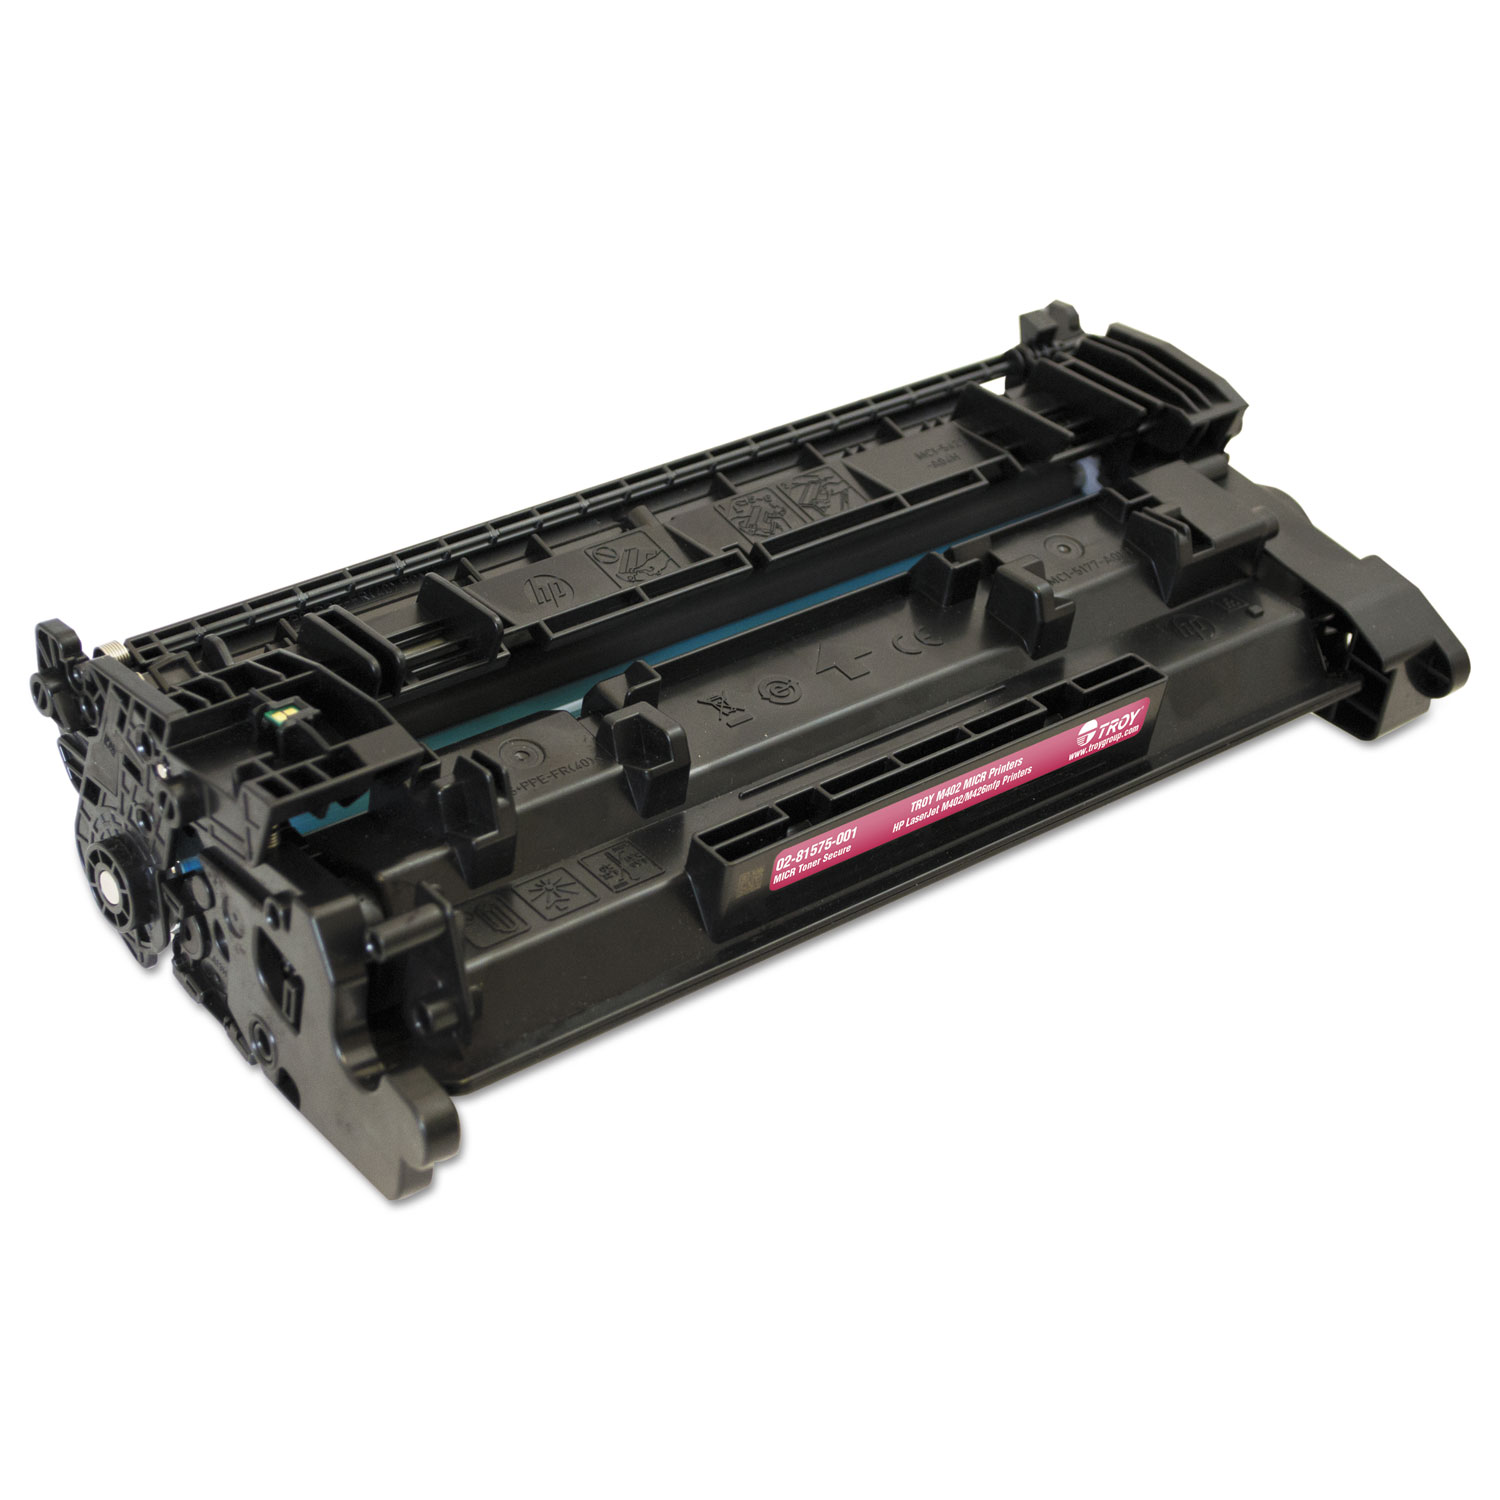  TROY 02-81575-001 0281575001 226A MICR Toner Secure, Alternative for HP CF226A, Black (TRS0281575001) 